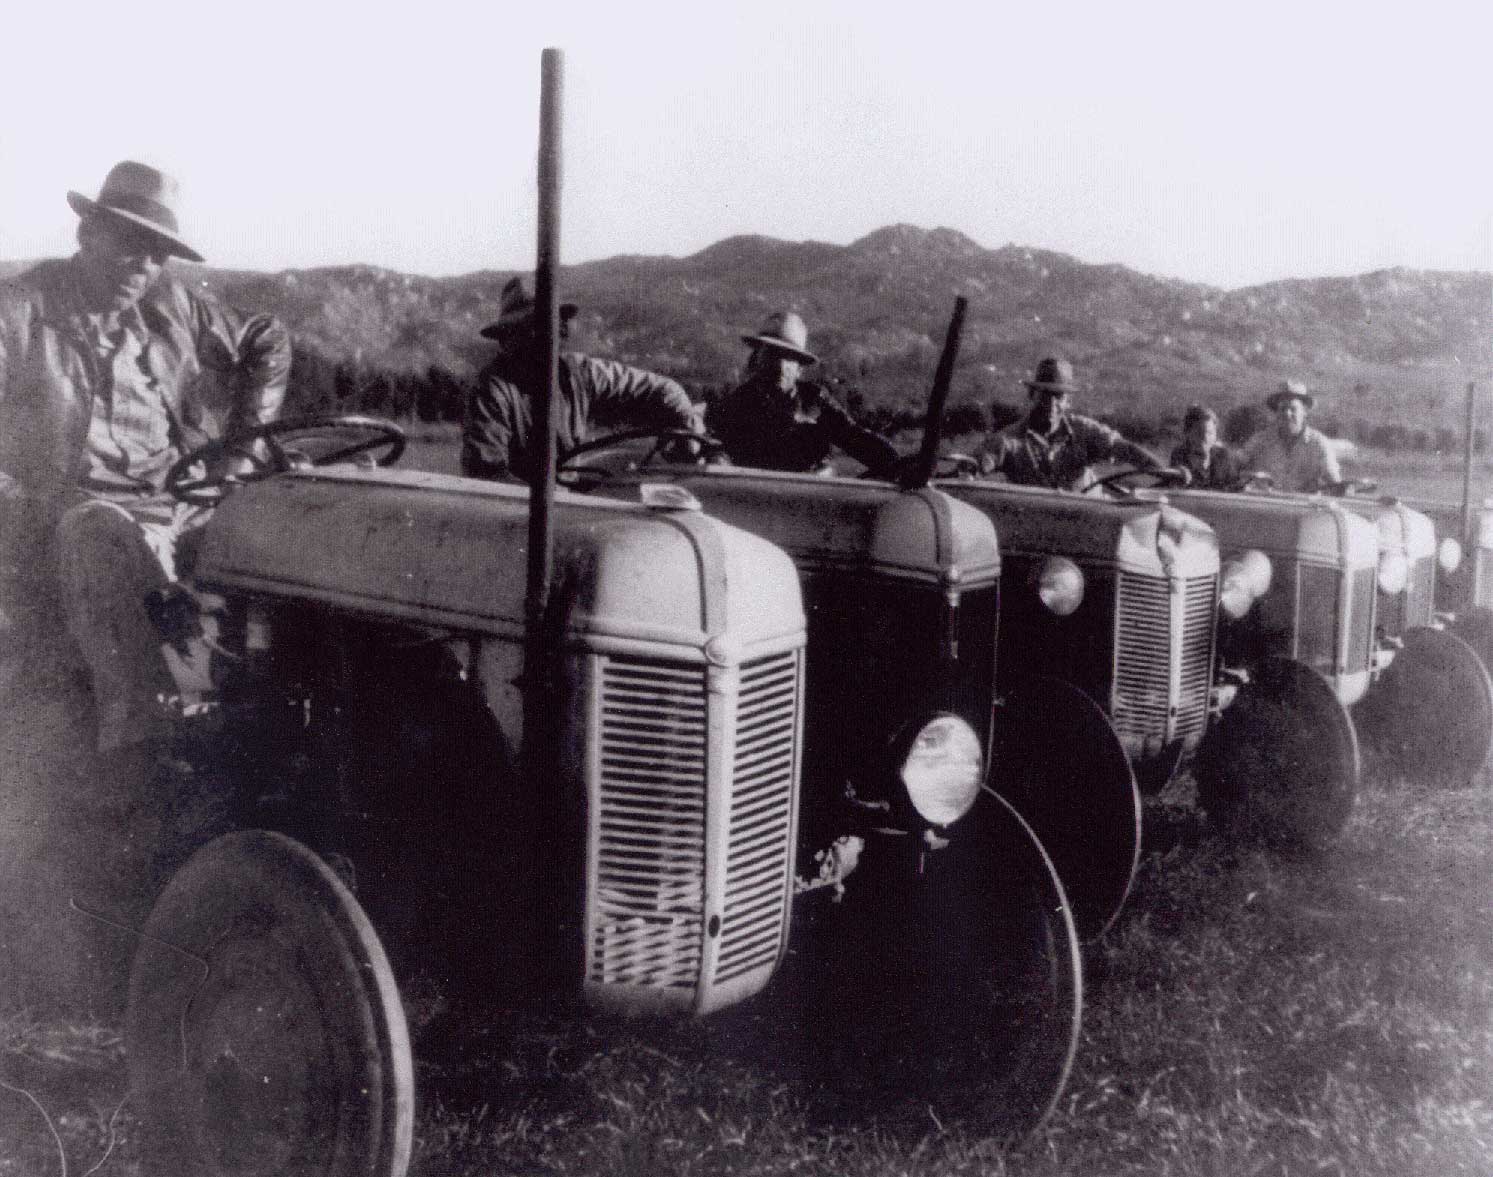 My Grandfarther's tractor